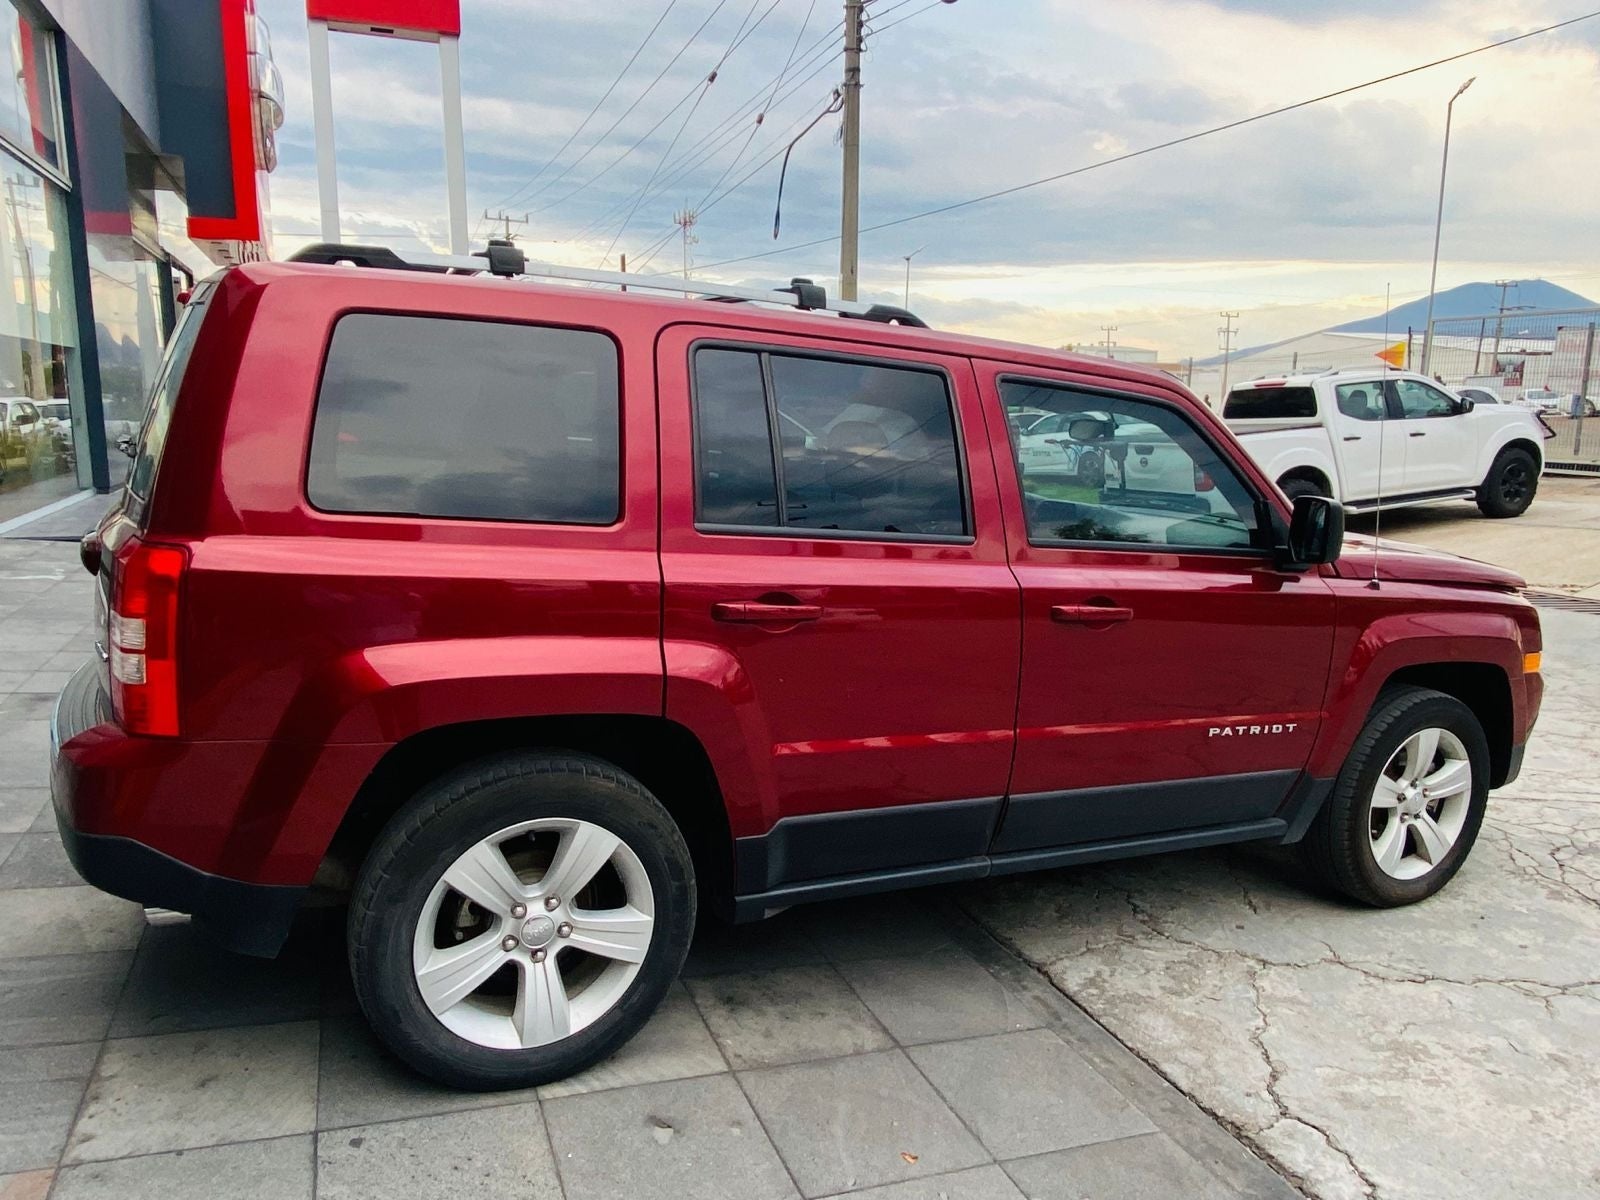 2017 Jeep Patriot 2.4 Limited 4x2 At